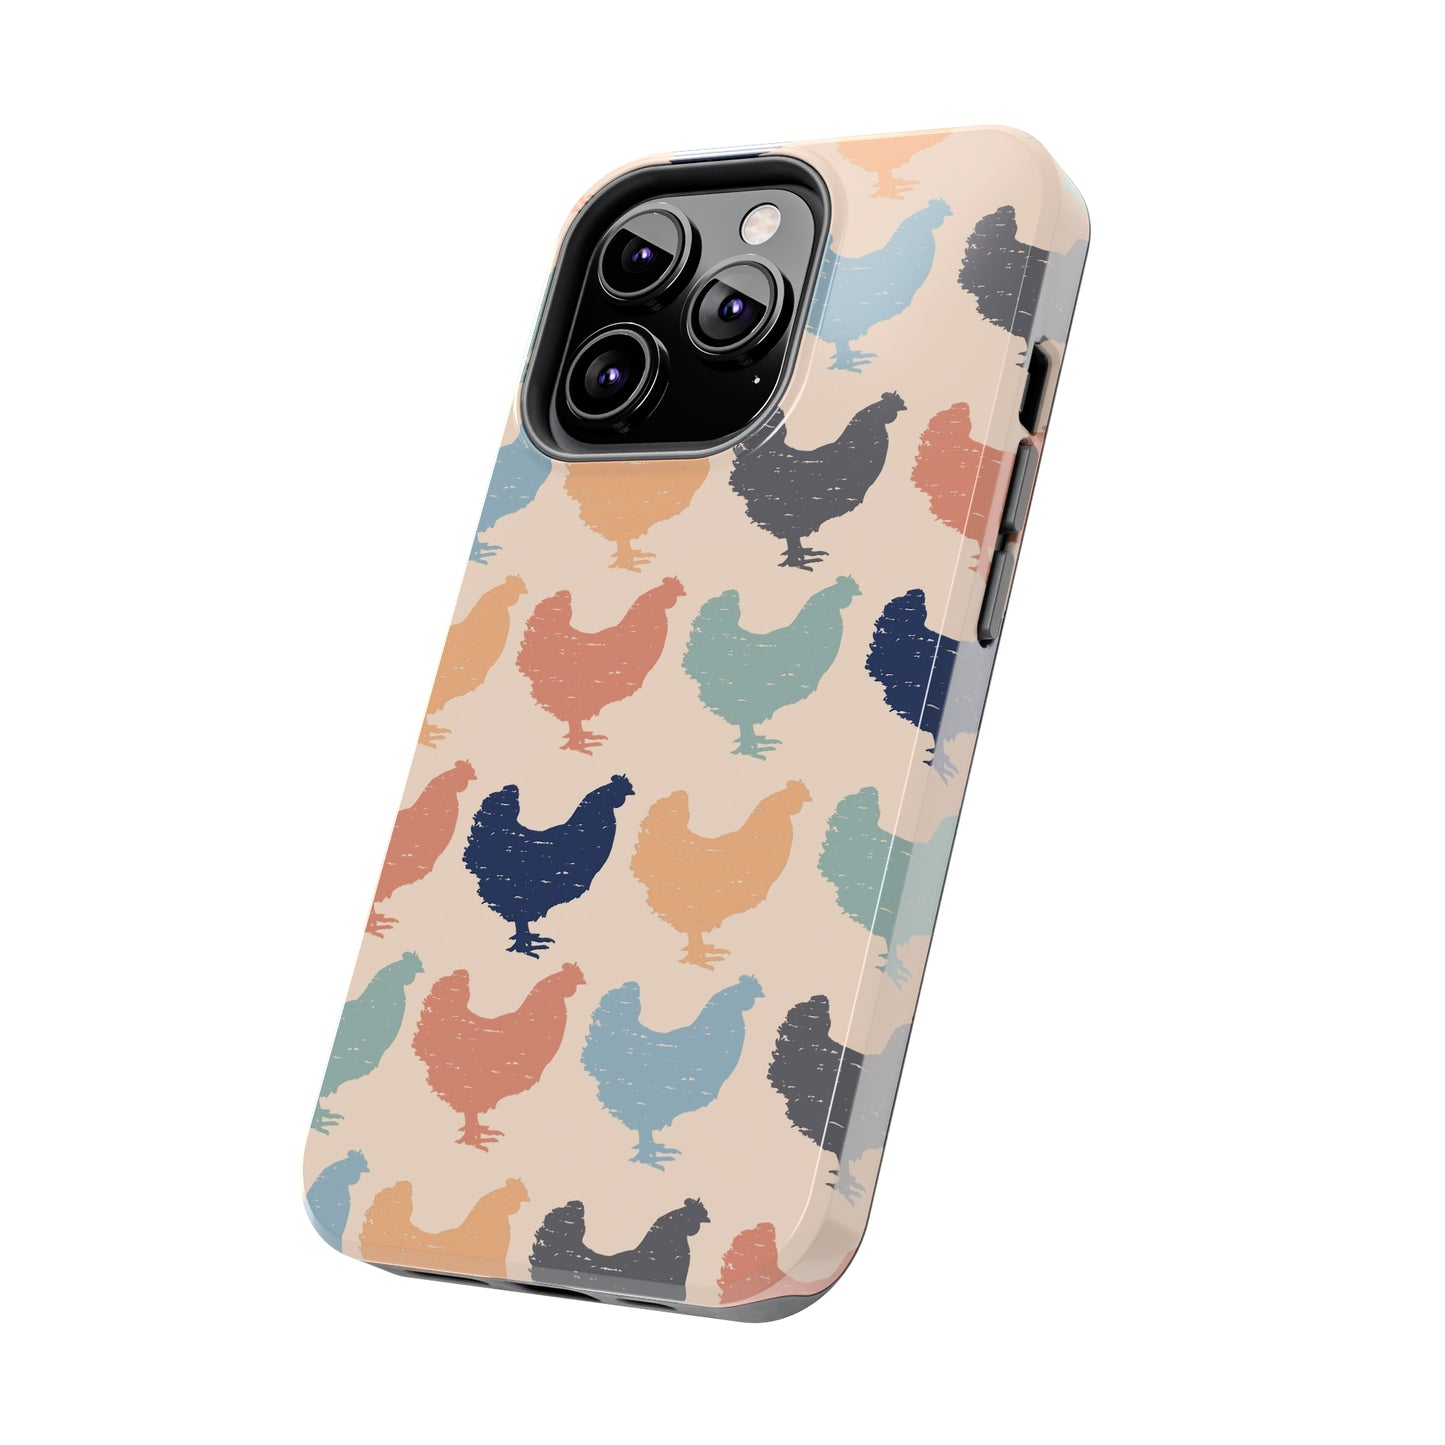 Colorful Chicken Iphone Tough Phone Cases